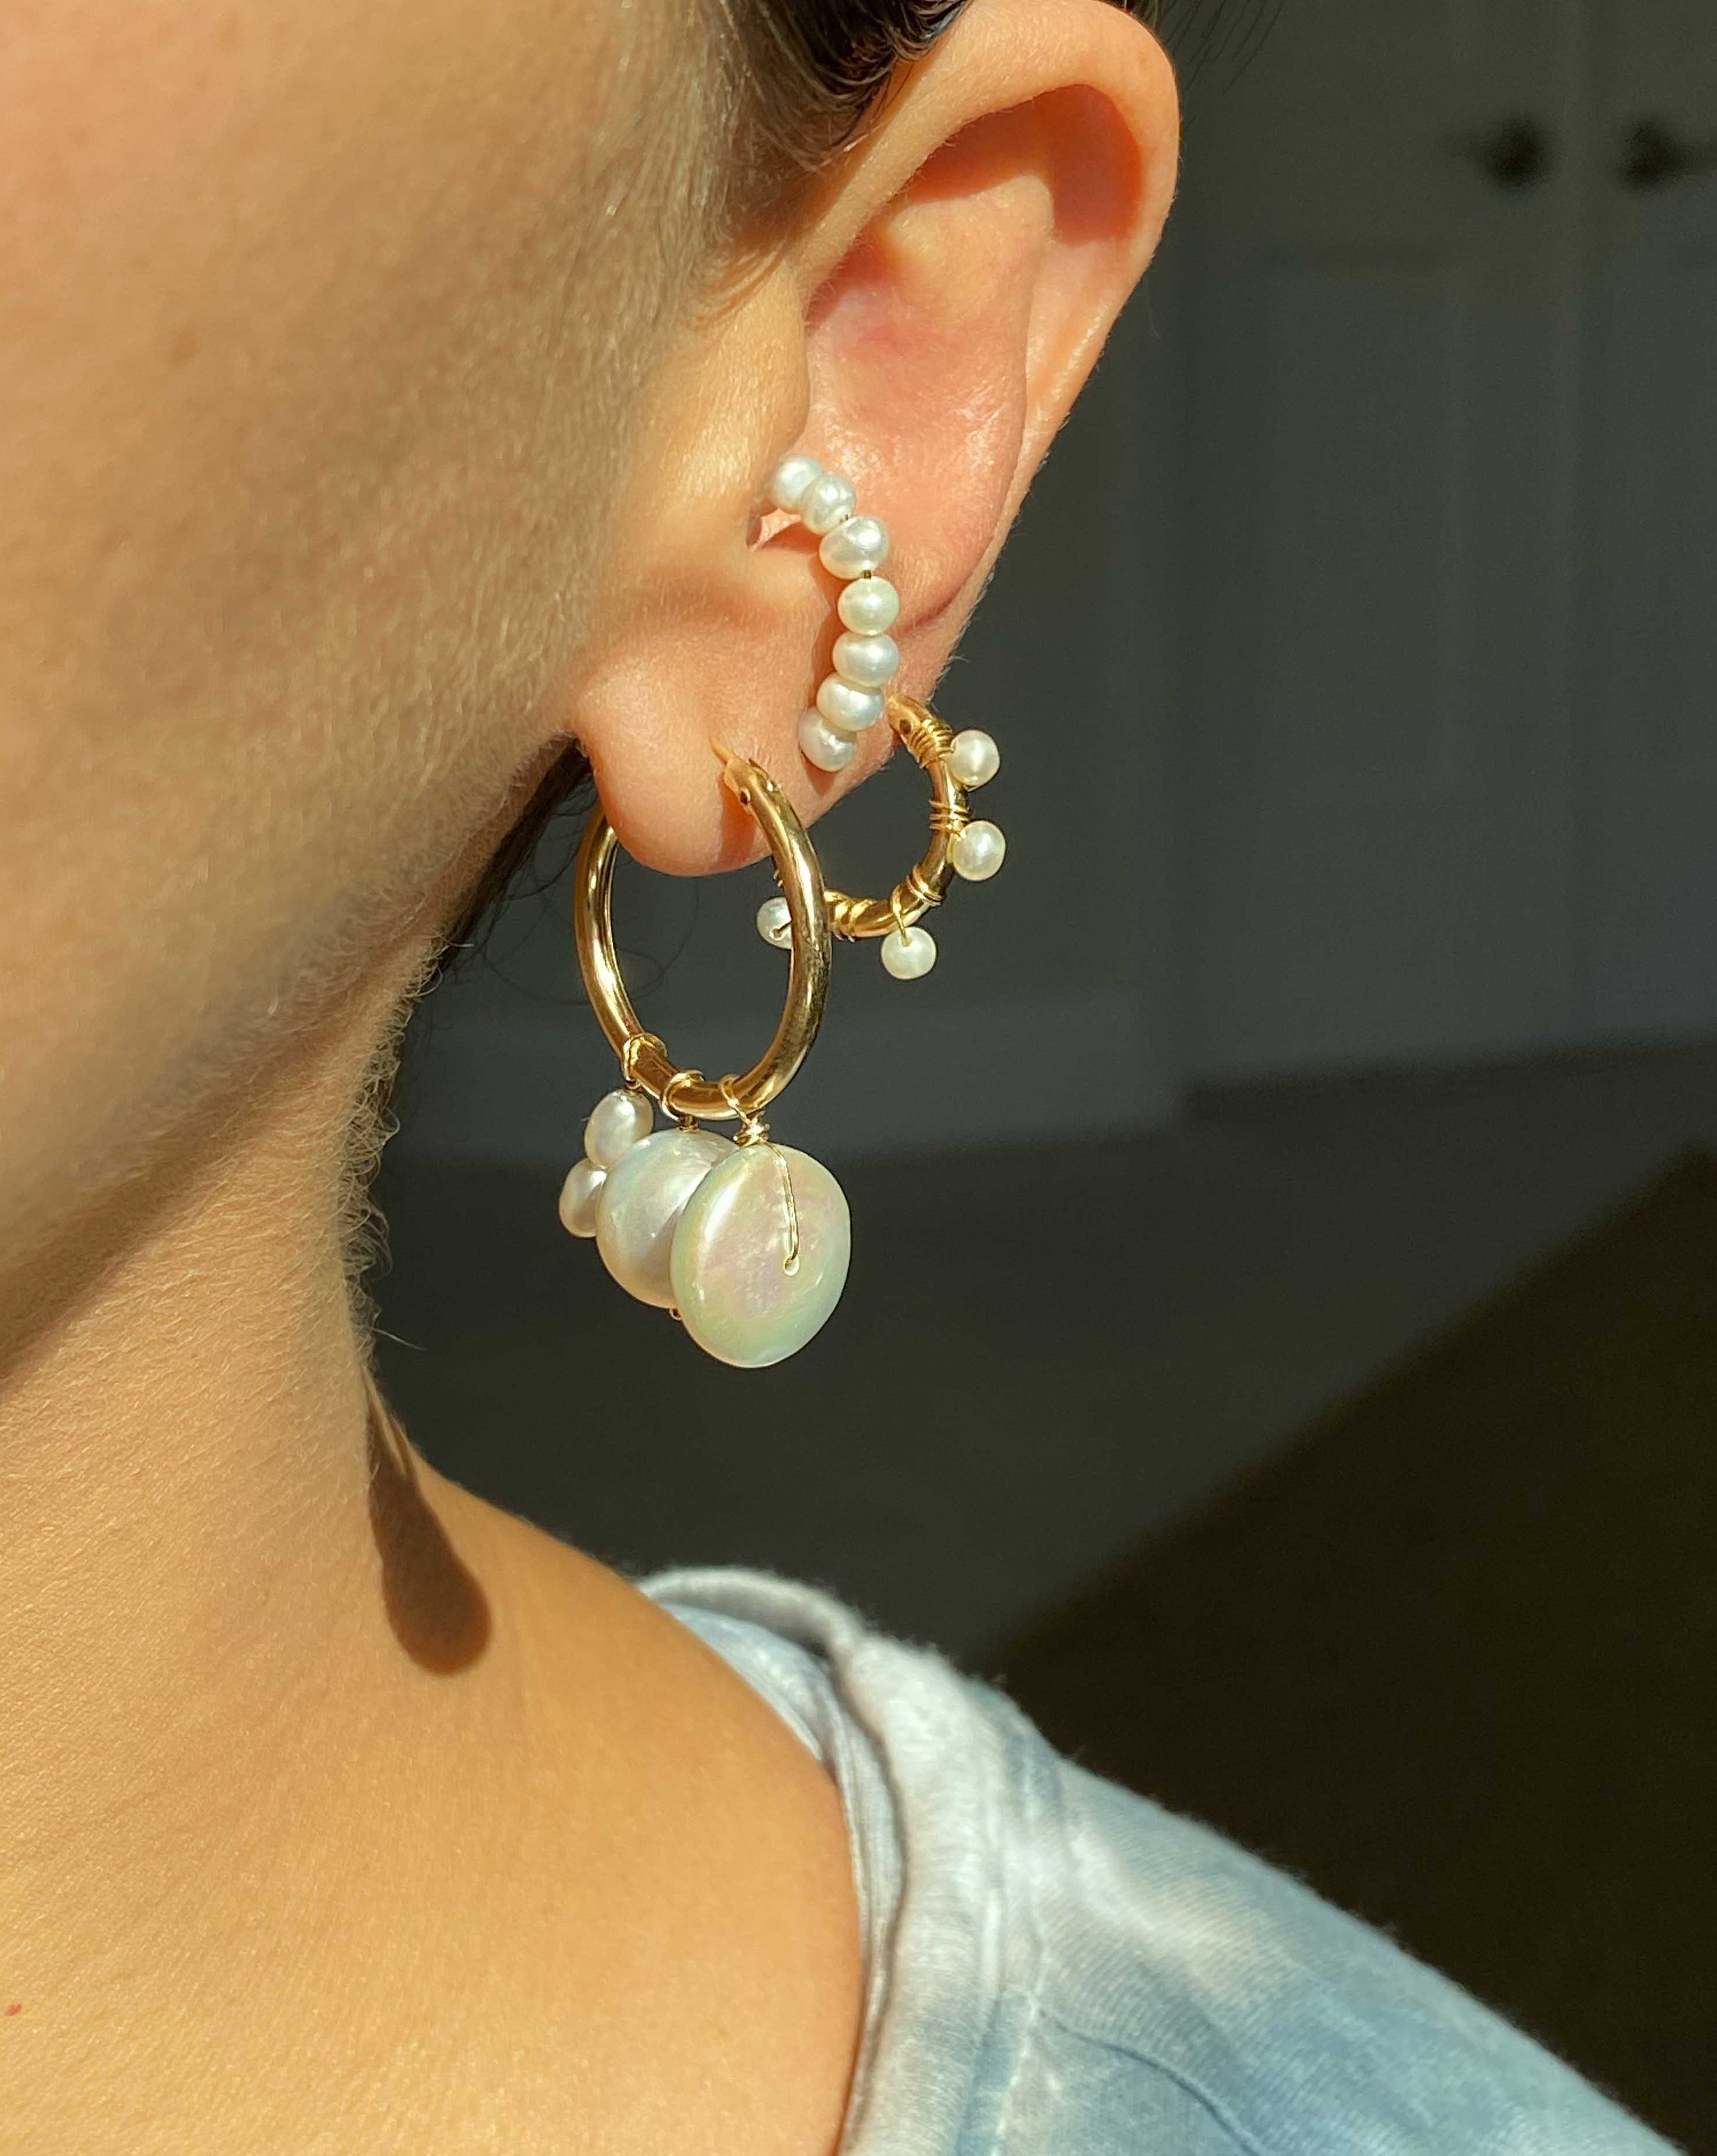 Lolo Hoops by KOZAKH. Stud earrings crafted in 14K Gold Filled, featuring 3mm white freshwater Pearls forming a hoop shape.